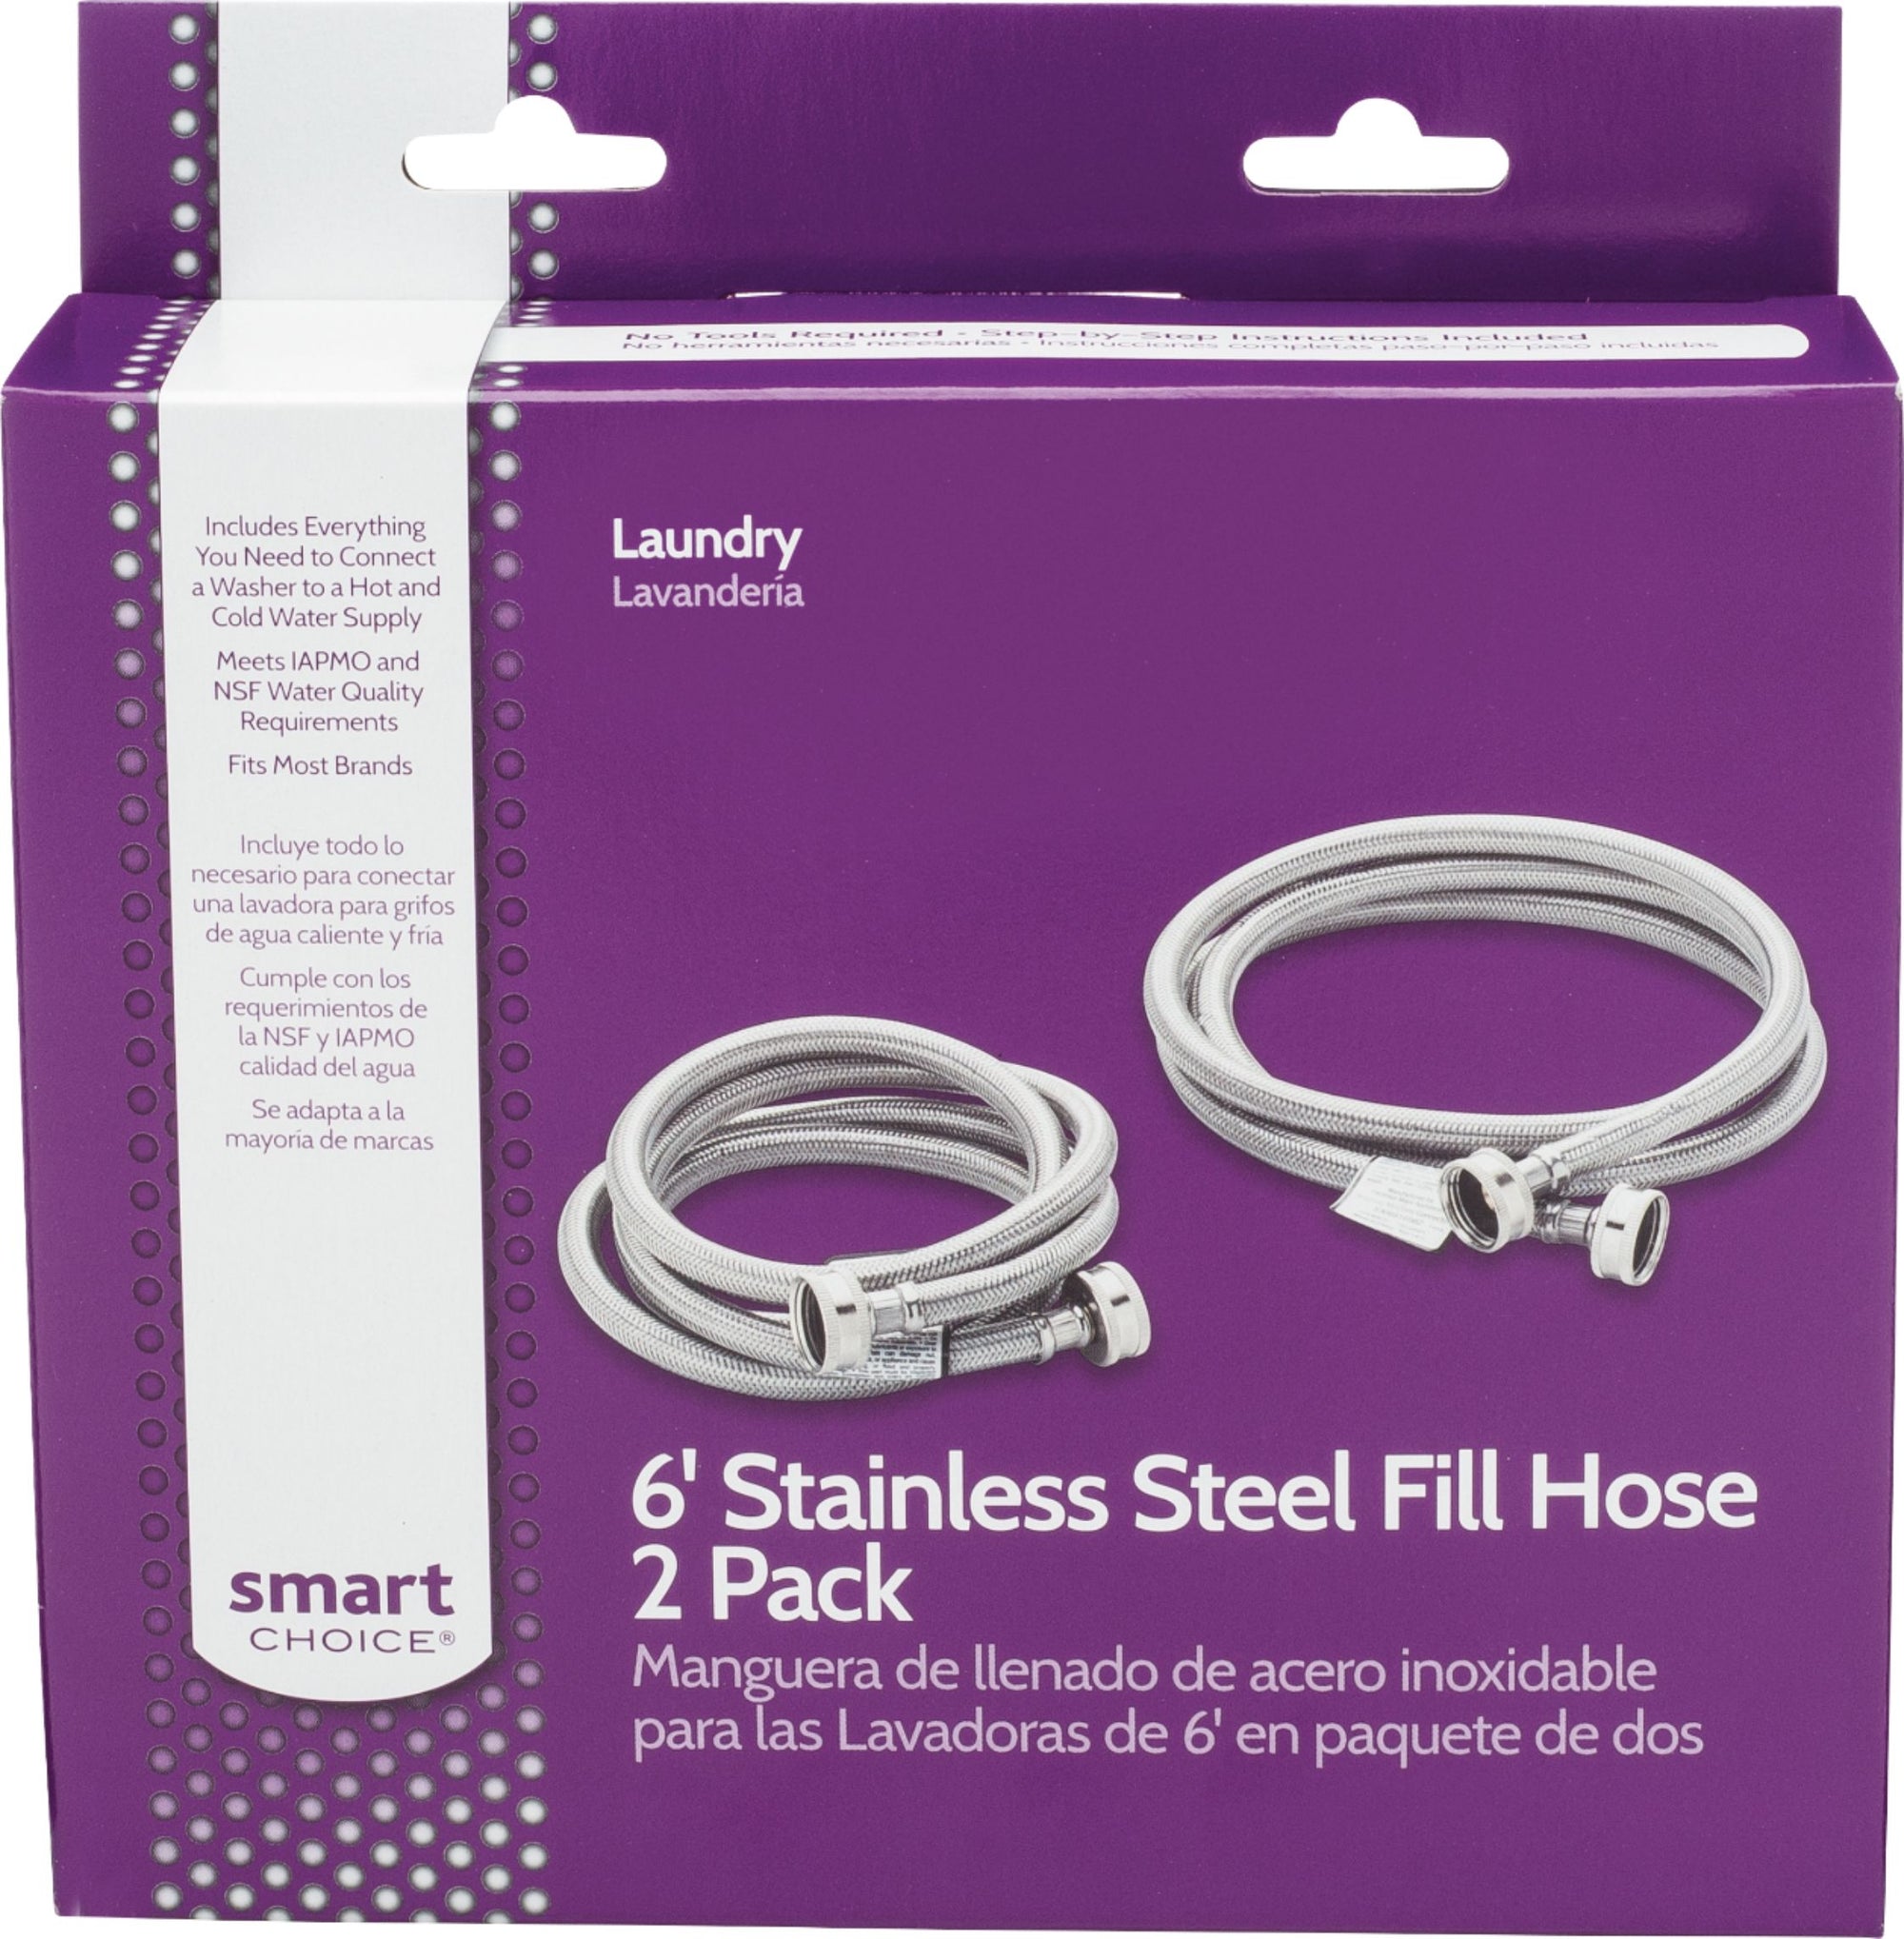 Smart Choice - 5304490736/5305516562 6' Stainless-Steel Washing Machine Fill Hose (2-Pack) - Silver